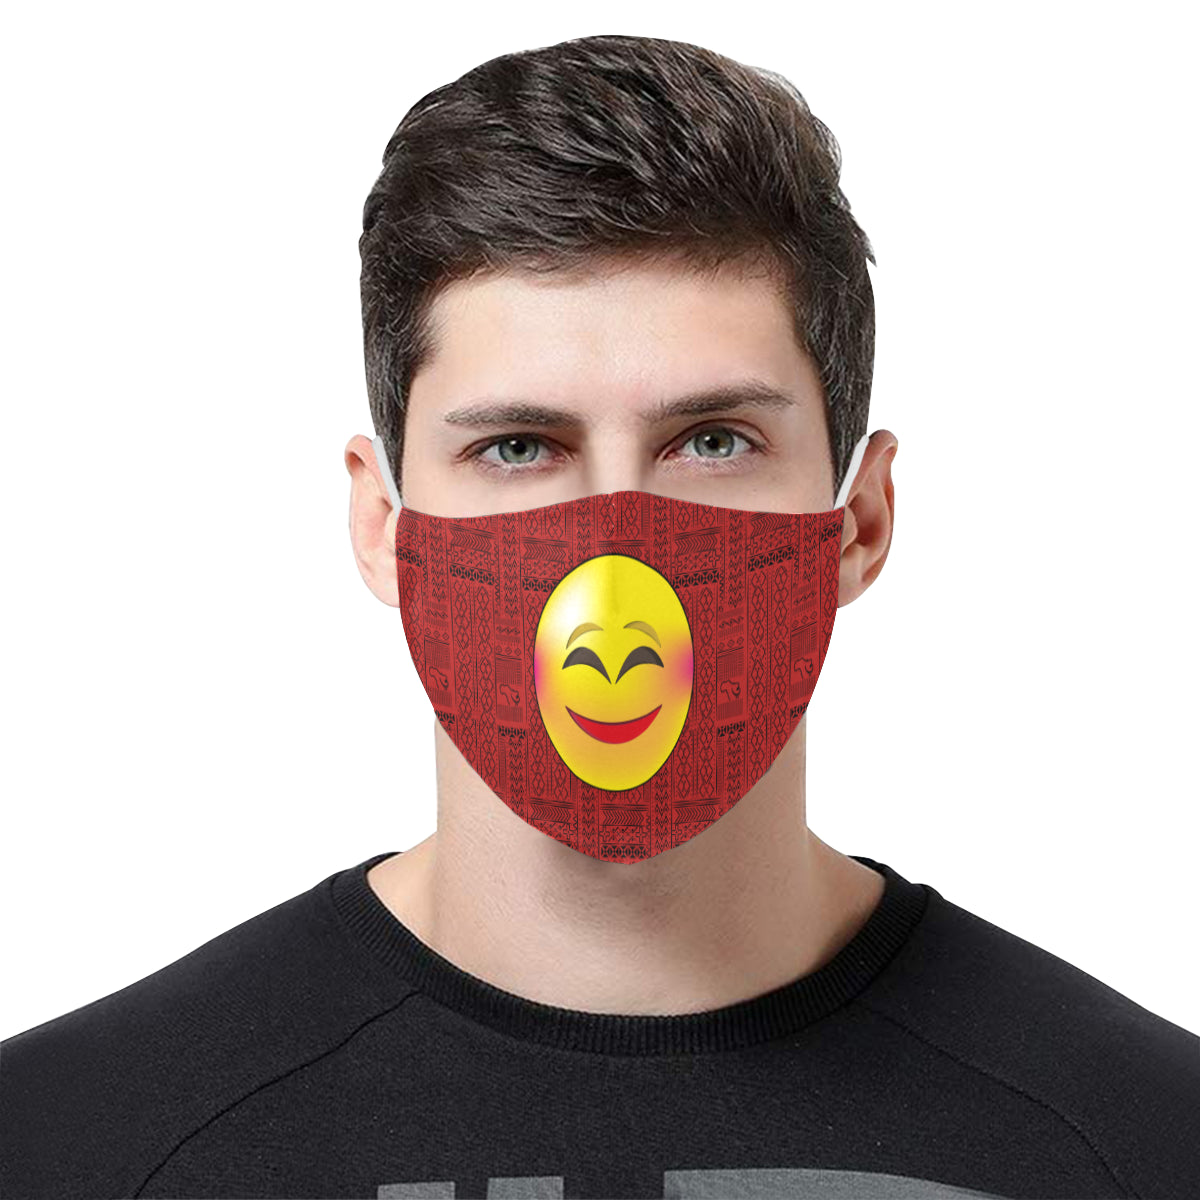 Blushing Tribal Print Emoji Cotton Fabric Face Mask with Filter Slot and Adjustable Strap - Non-medical use (2 Filters Included)